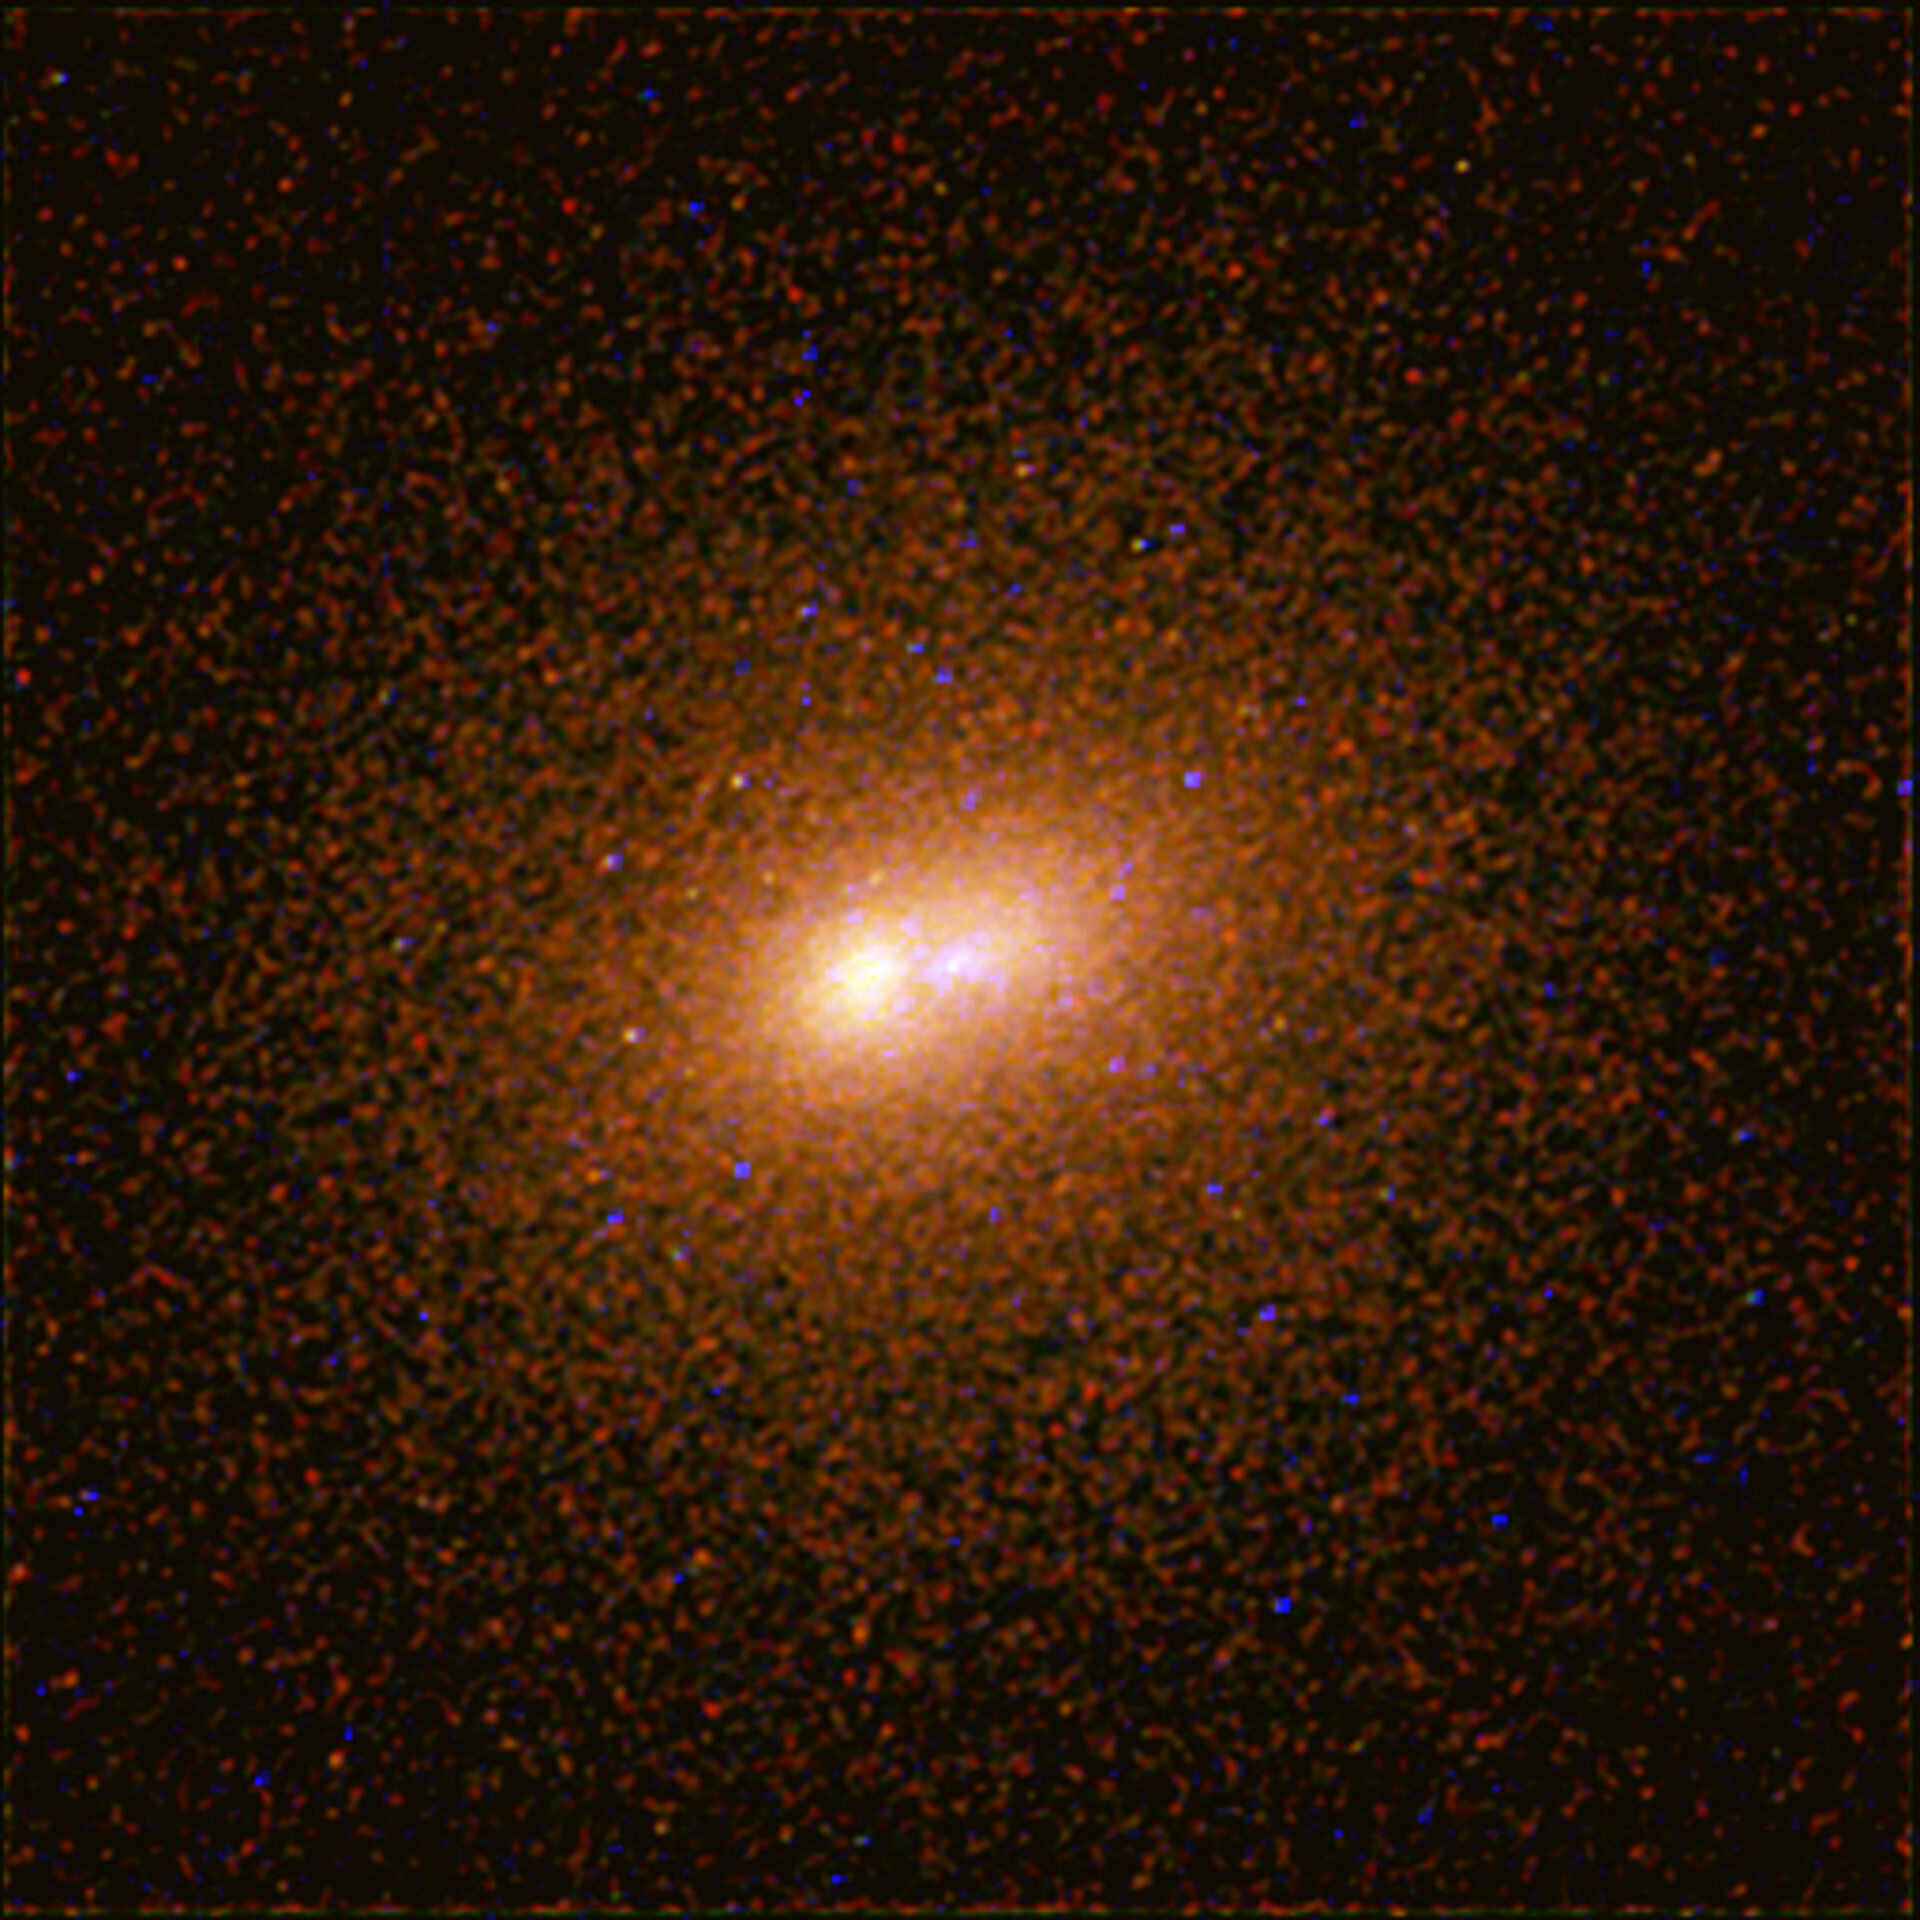 Hubble image of the core of M31